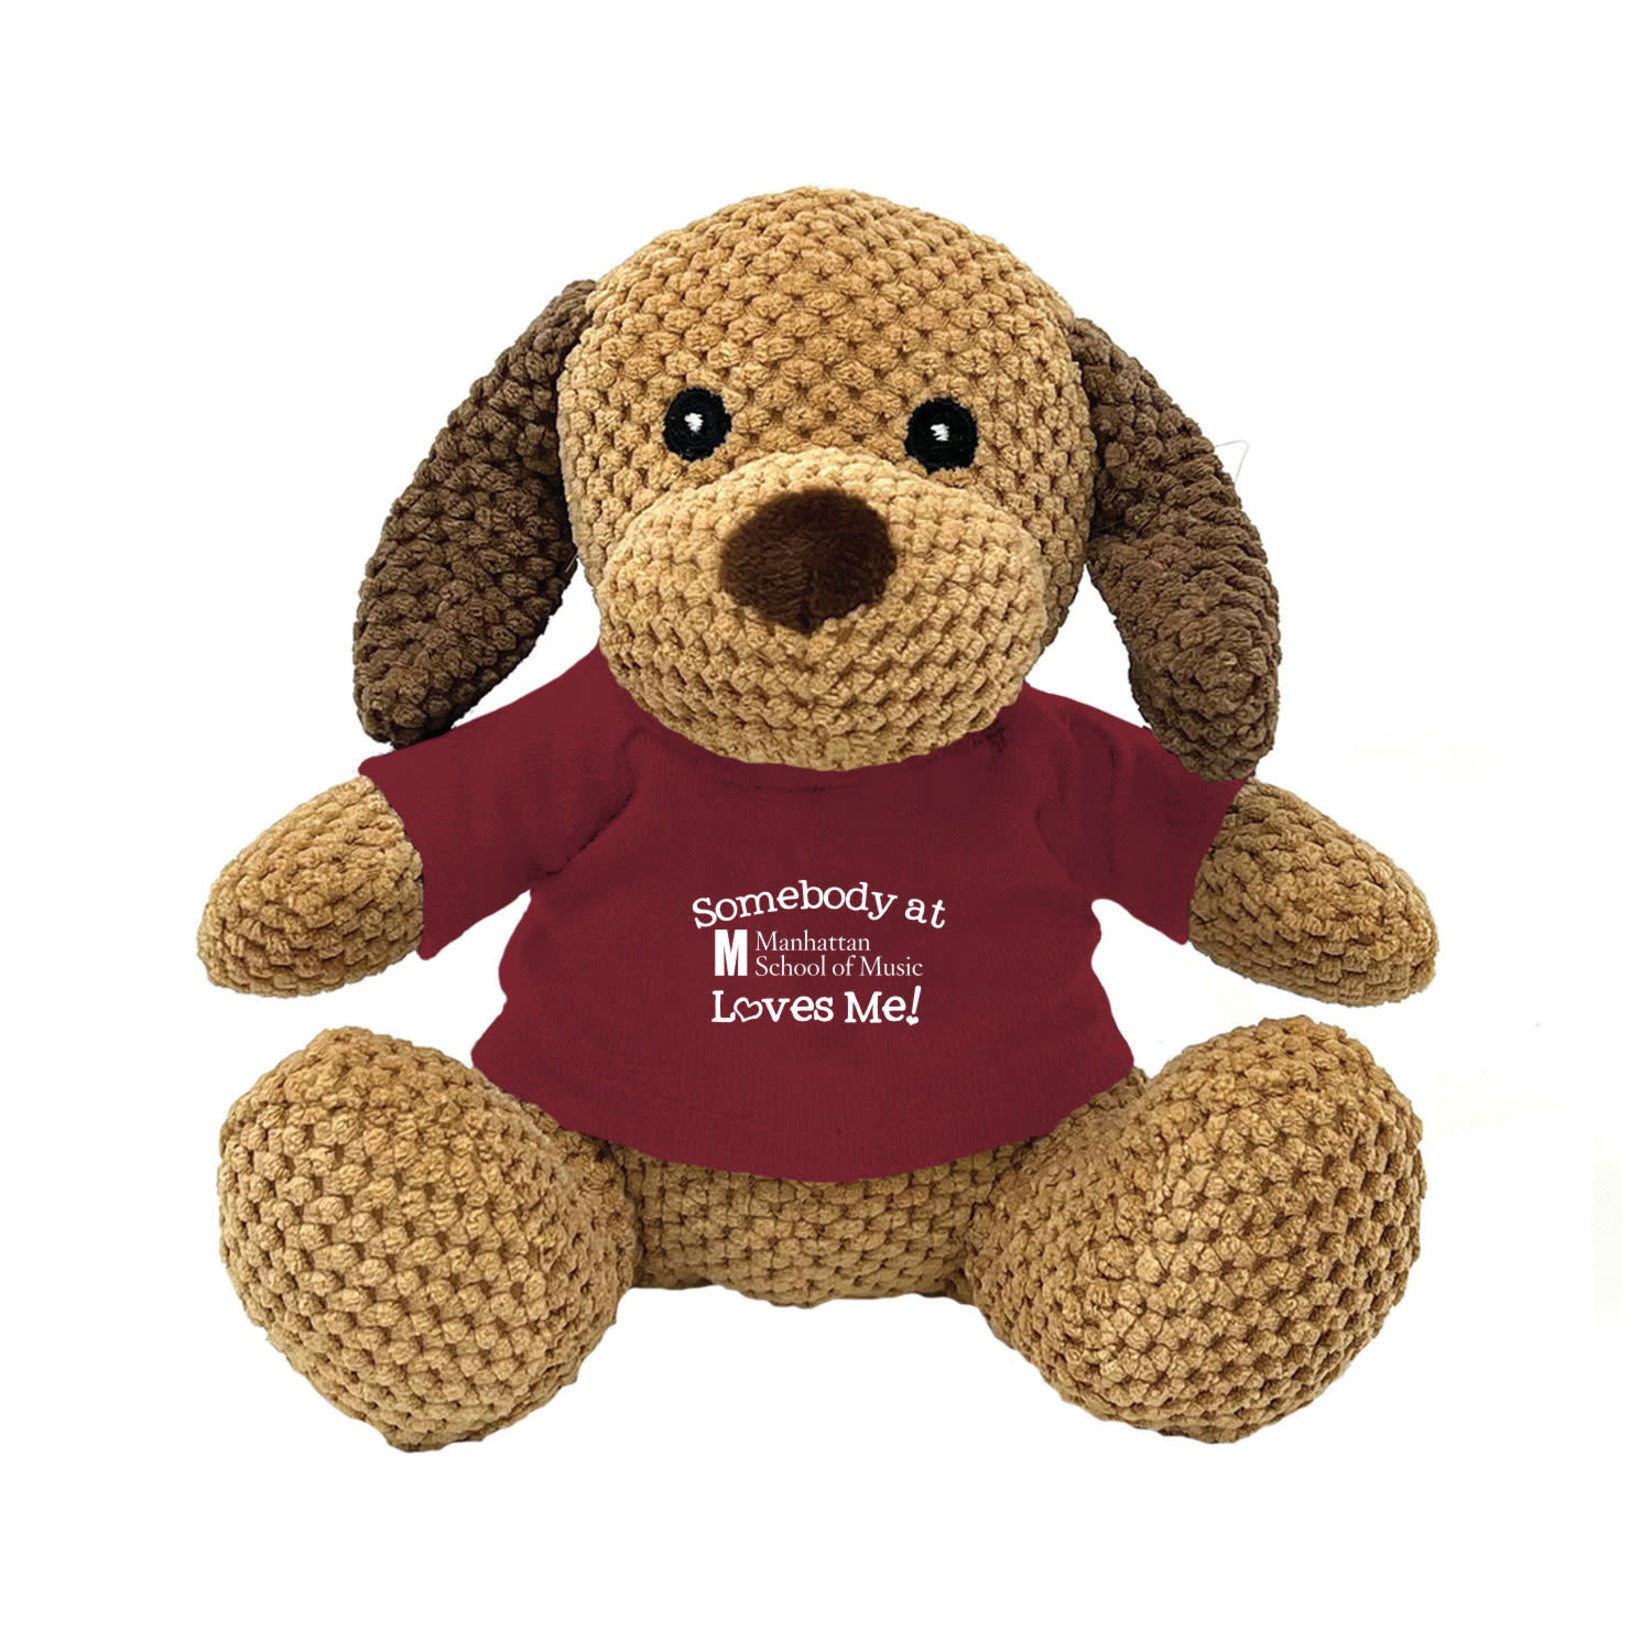 Various Woven Stuffed Animals with MSM T-shirt